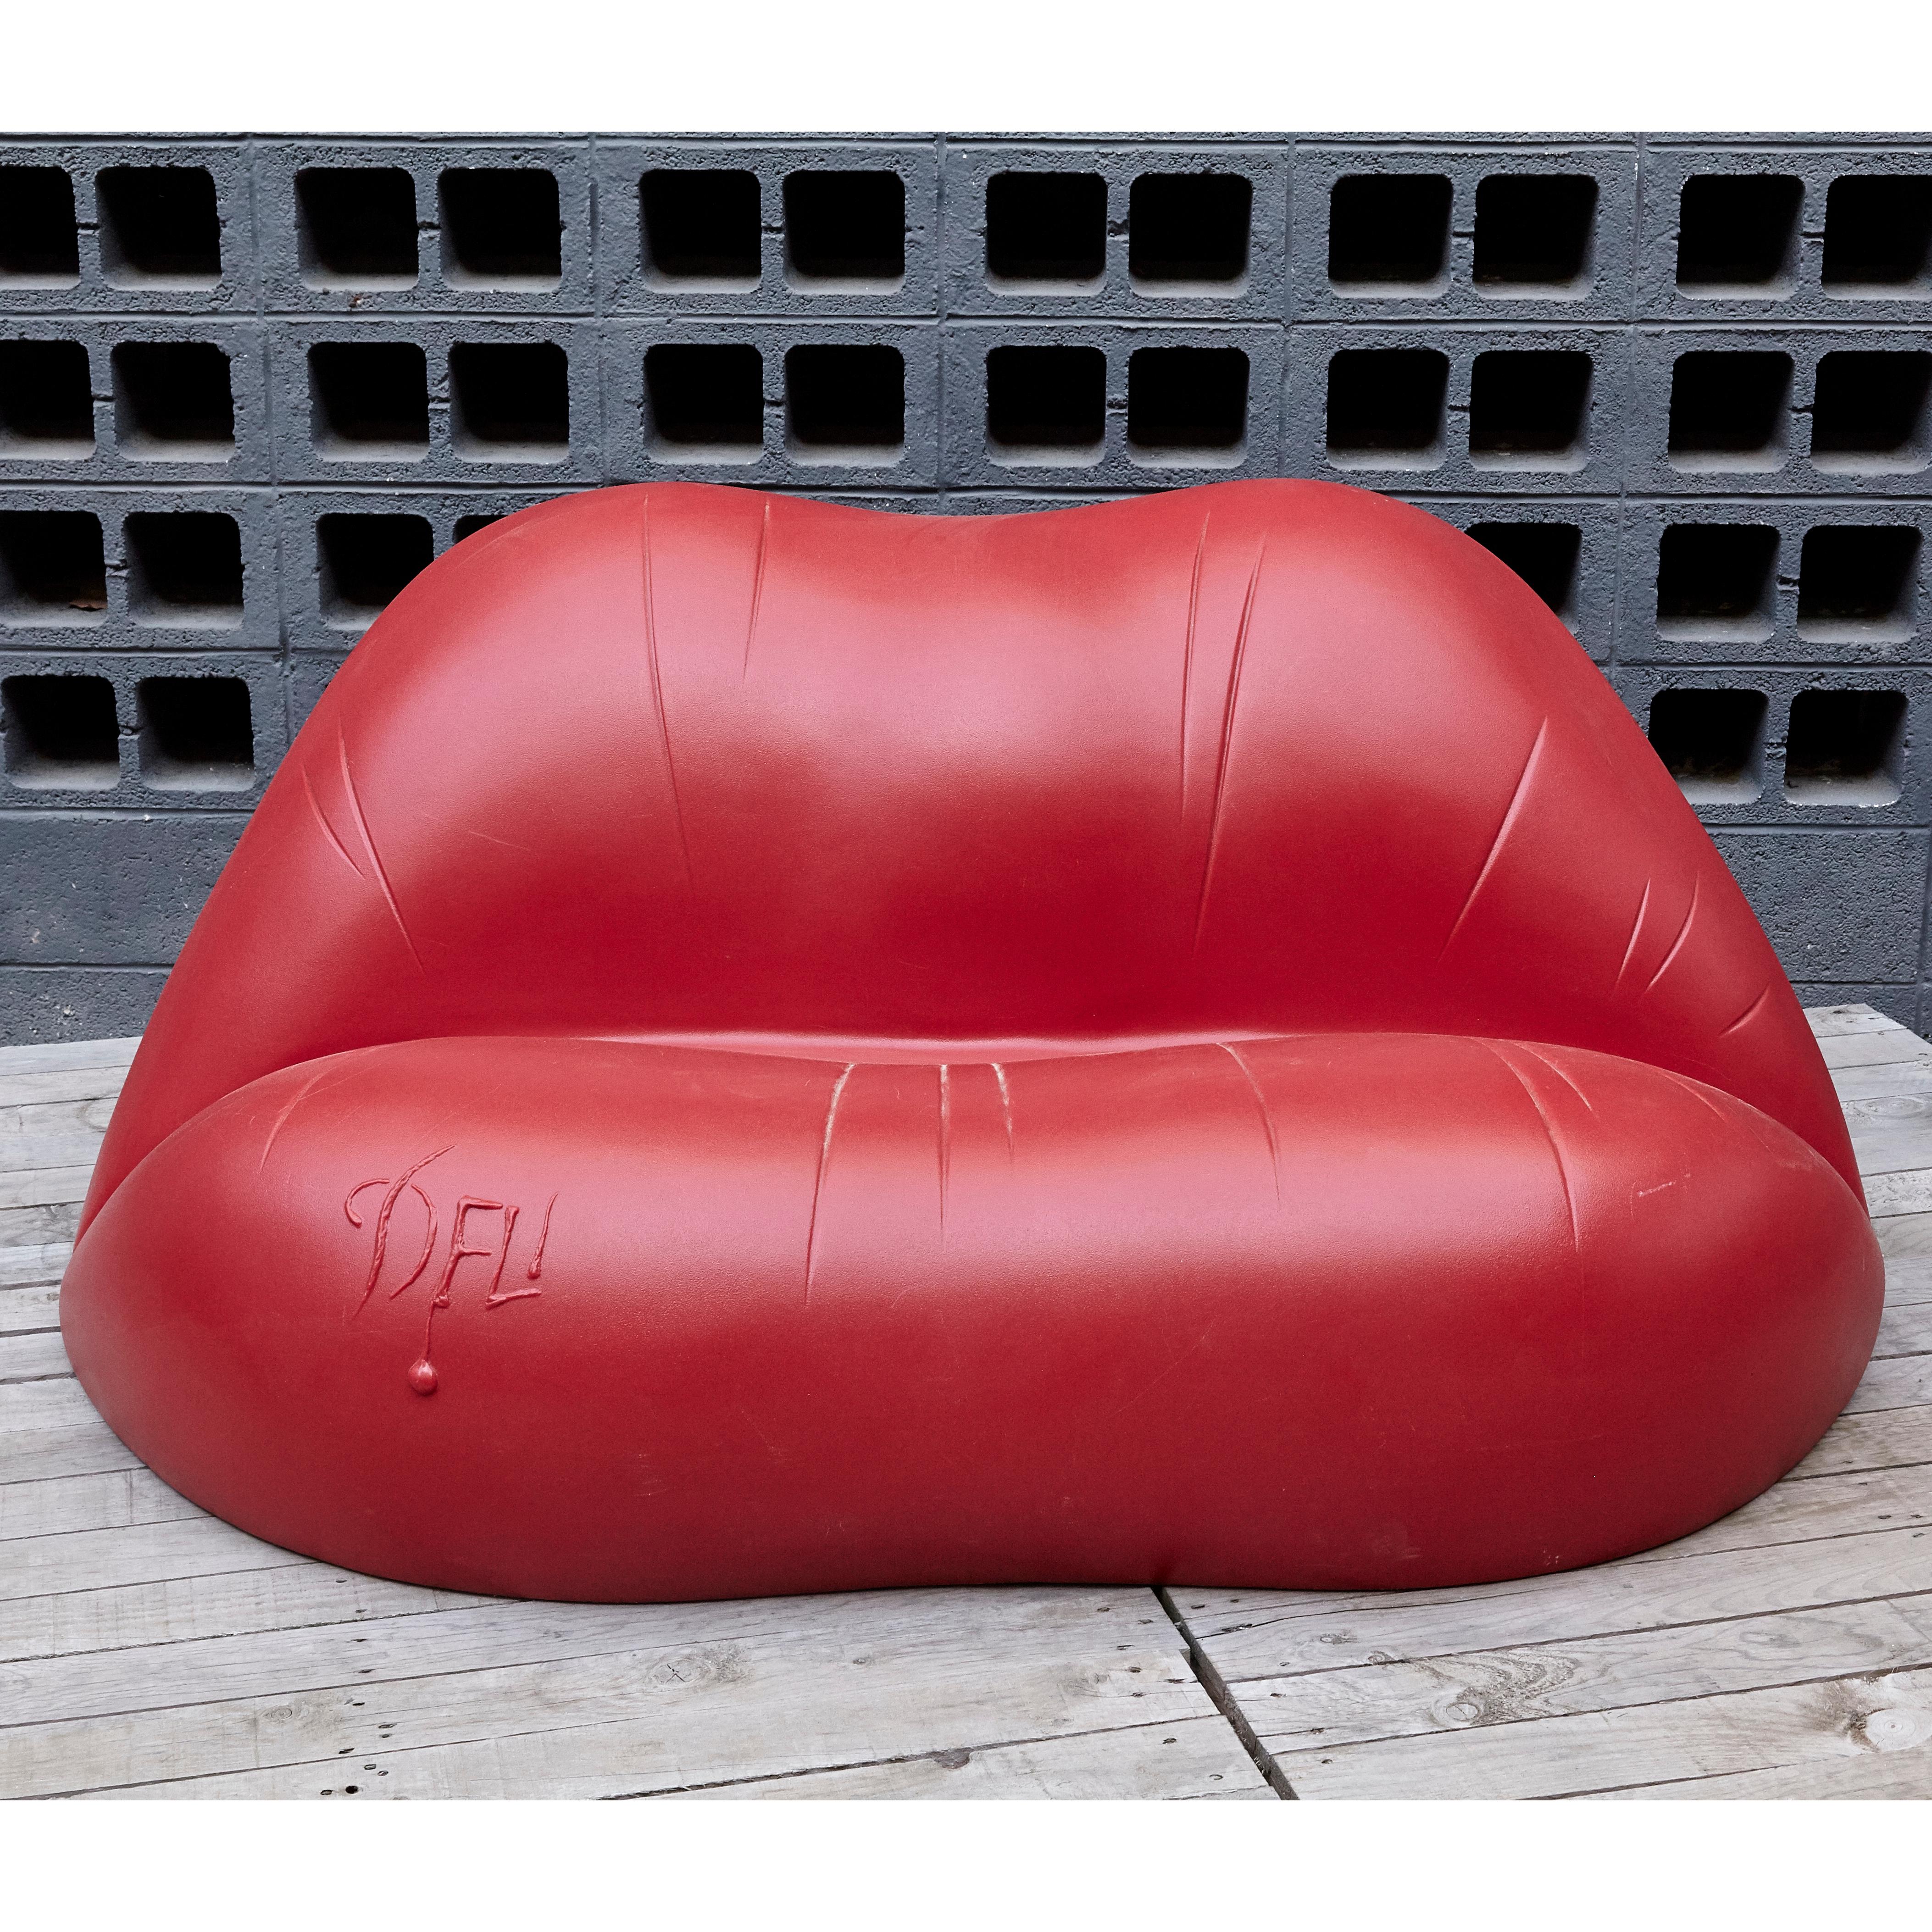 Dalilips designed by Salvador Dali for BD design.

Two-seat sofa made of polyethylene with rotational molding process. Color red.

Measures: 100 x 170 x 73 H cm.

Is the famous sofa in the shape of a mouth which the artist created together